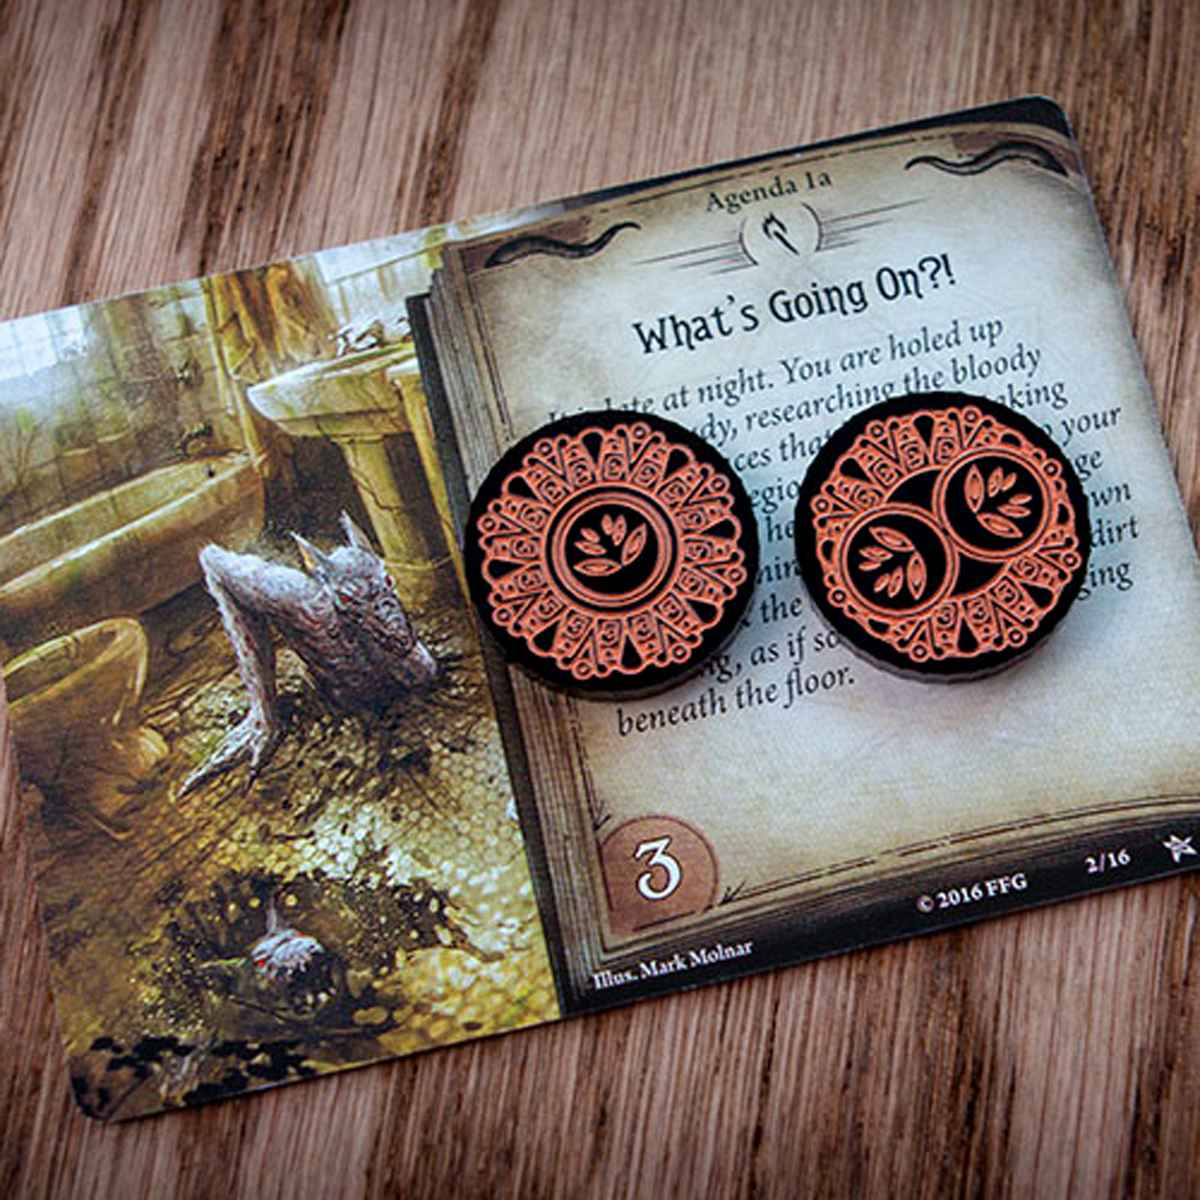 The one-value side and the two-value side of the Forgotten Limited Edition Doom Token represented by two different tokens on top of the Arkham Horror LCG agenda, What’s Going On